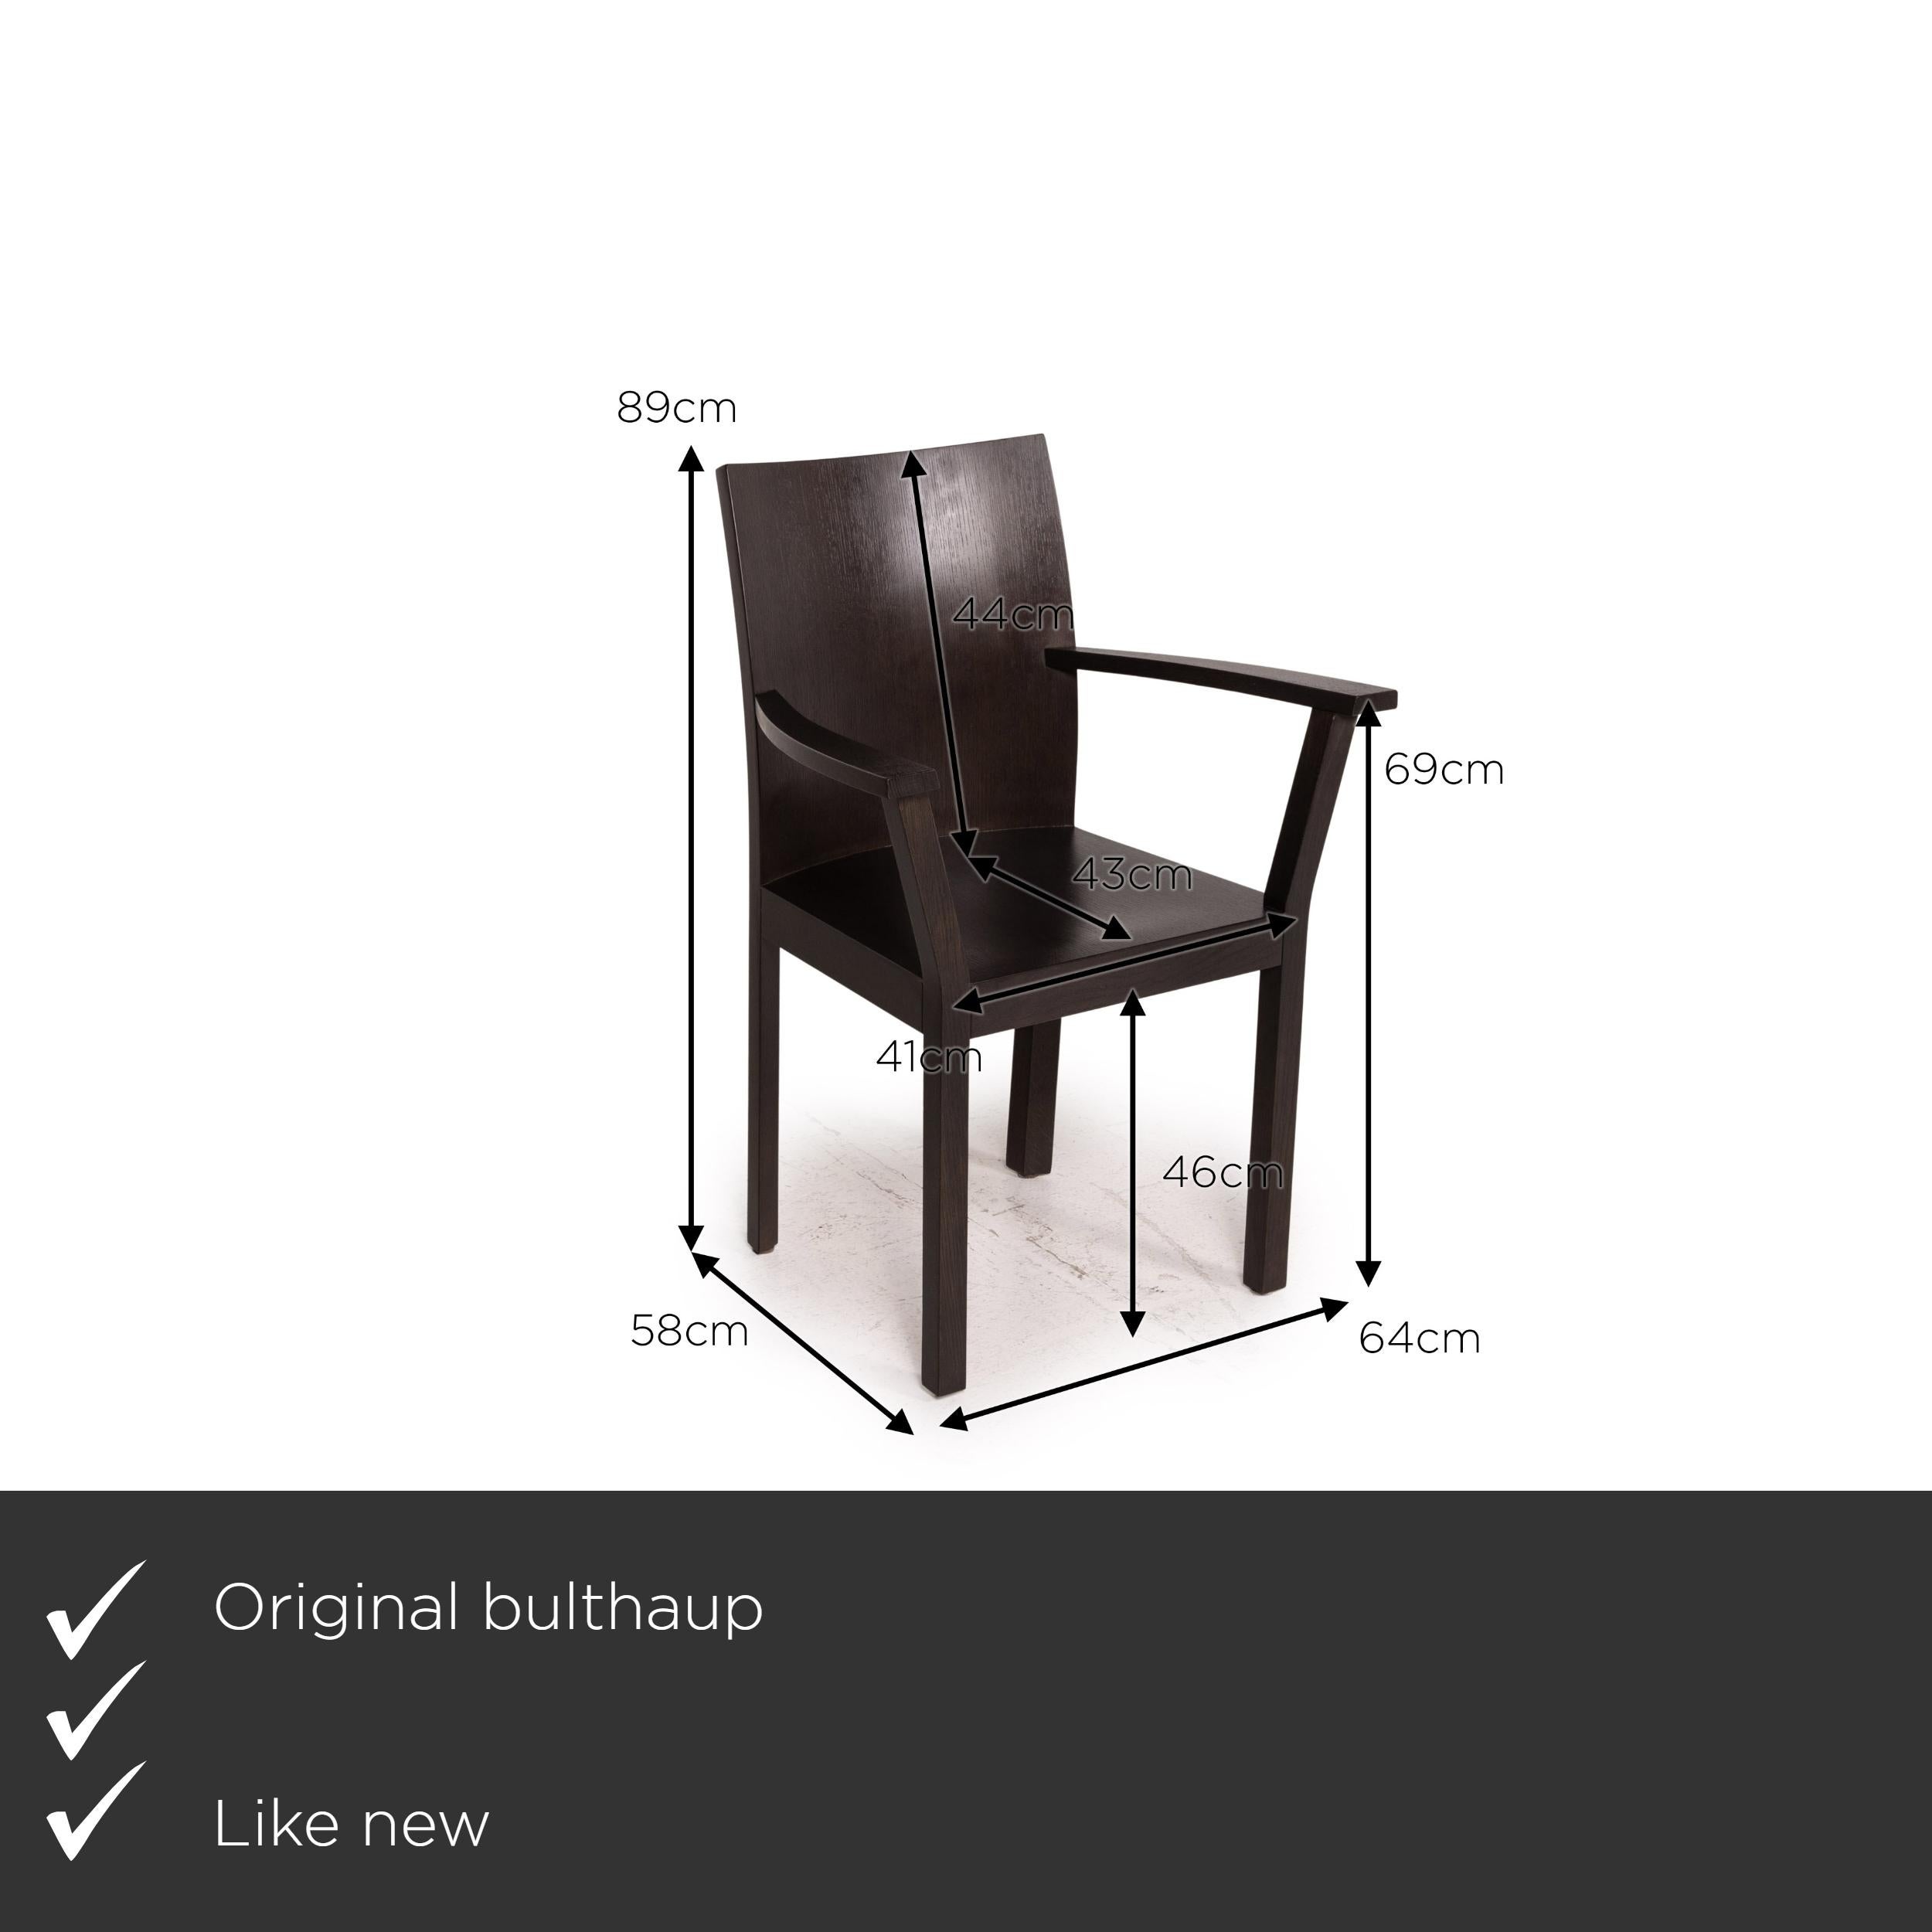 We present to you a bulthaup nemus wood chair dark brown brown.

Product measurements in centimeters:

Depth 58
Width 64
Height 89
Seat height 46
Rest height 69
Seat depth 43
Seat width 41
Back height 44.
 
  
  